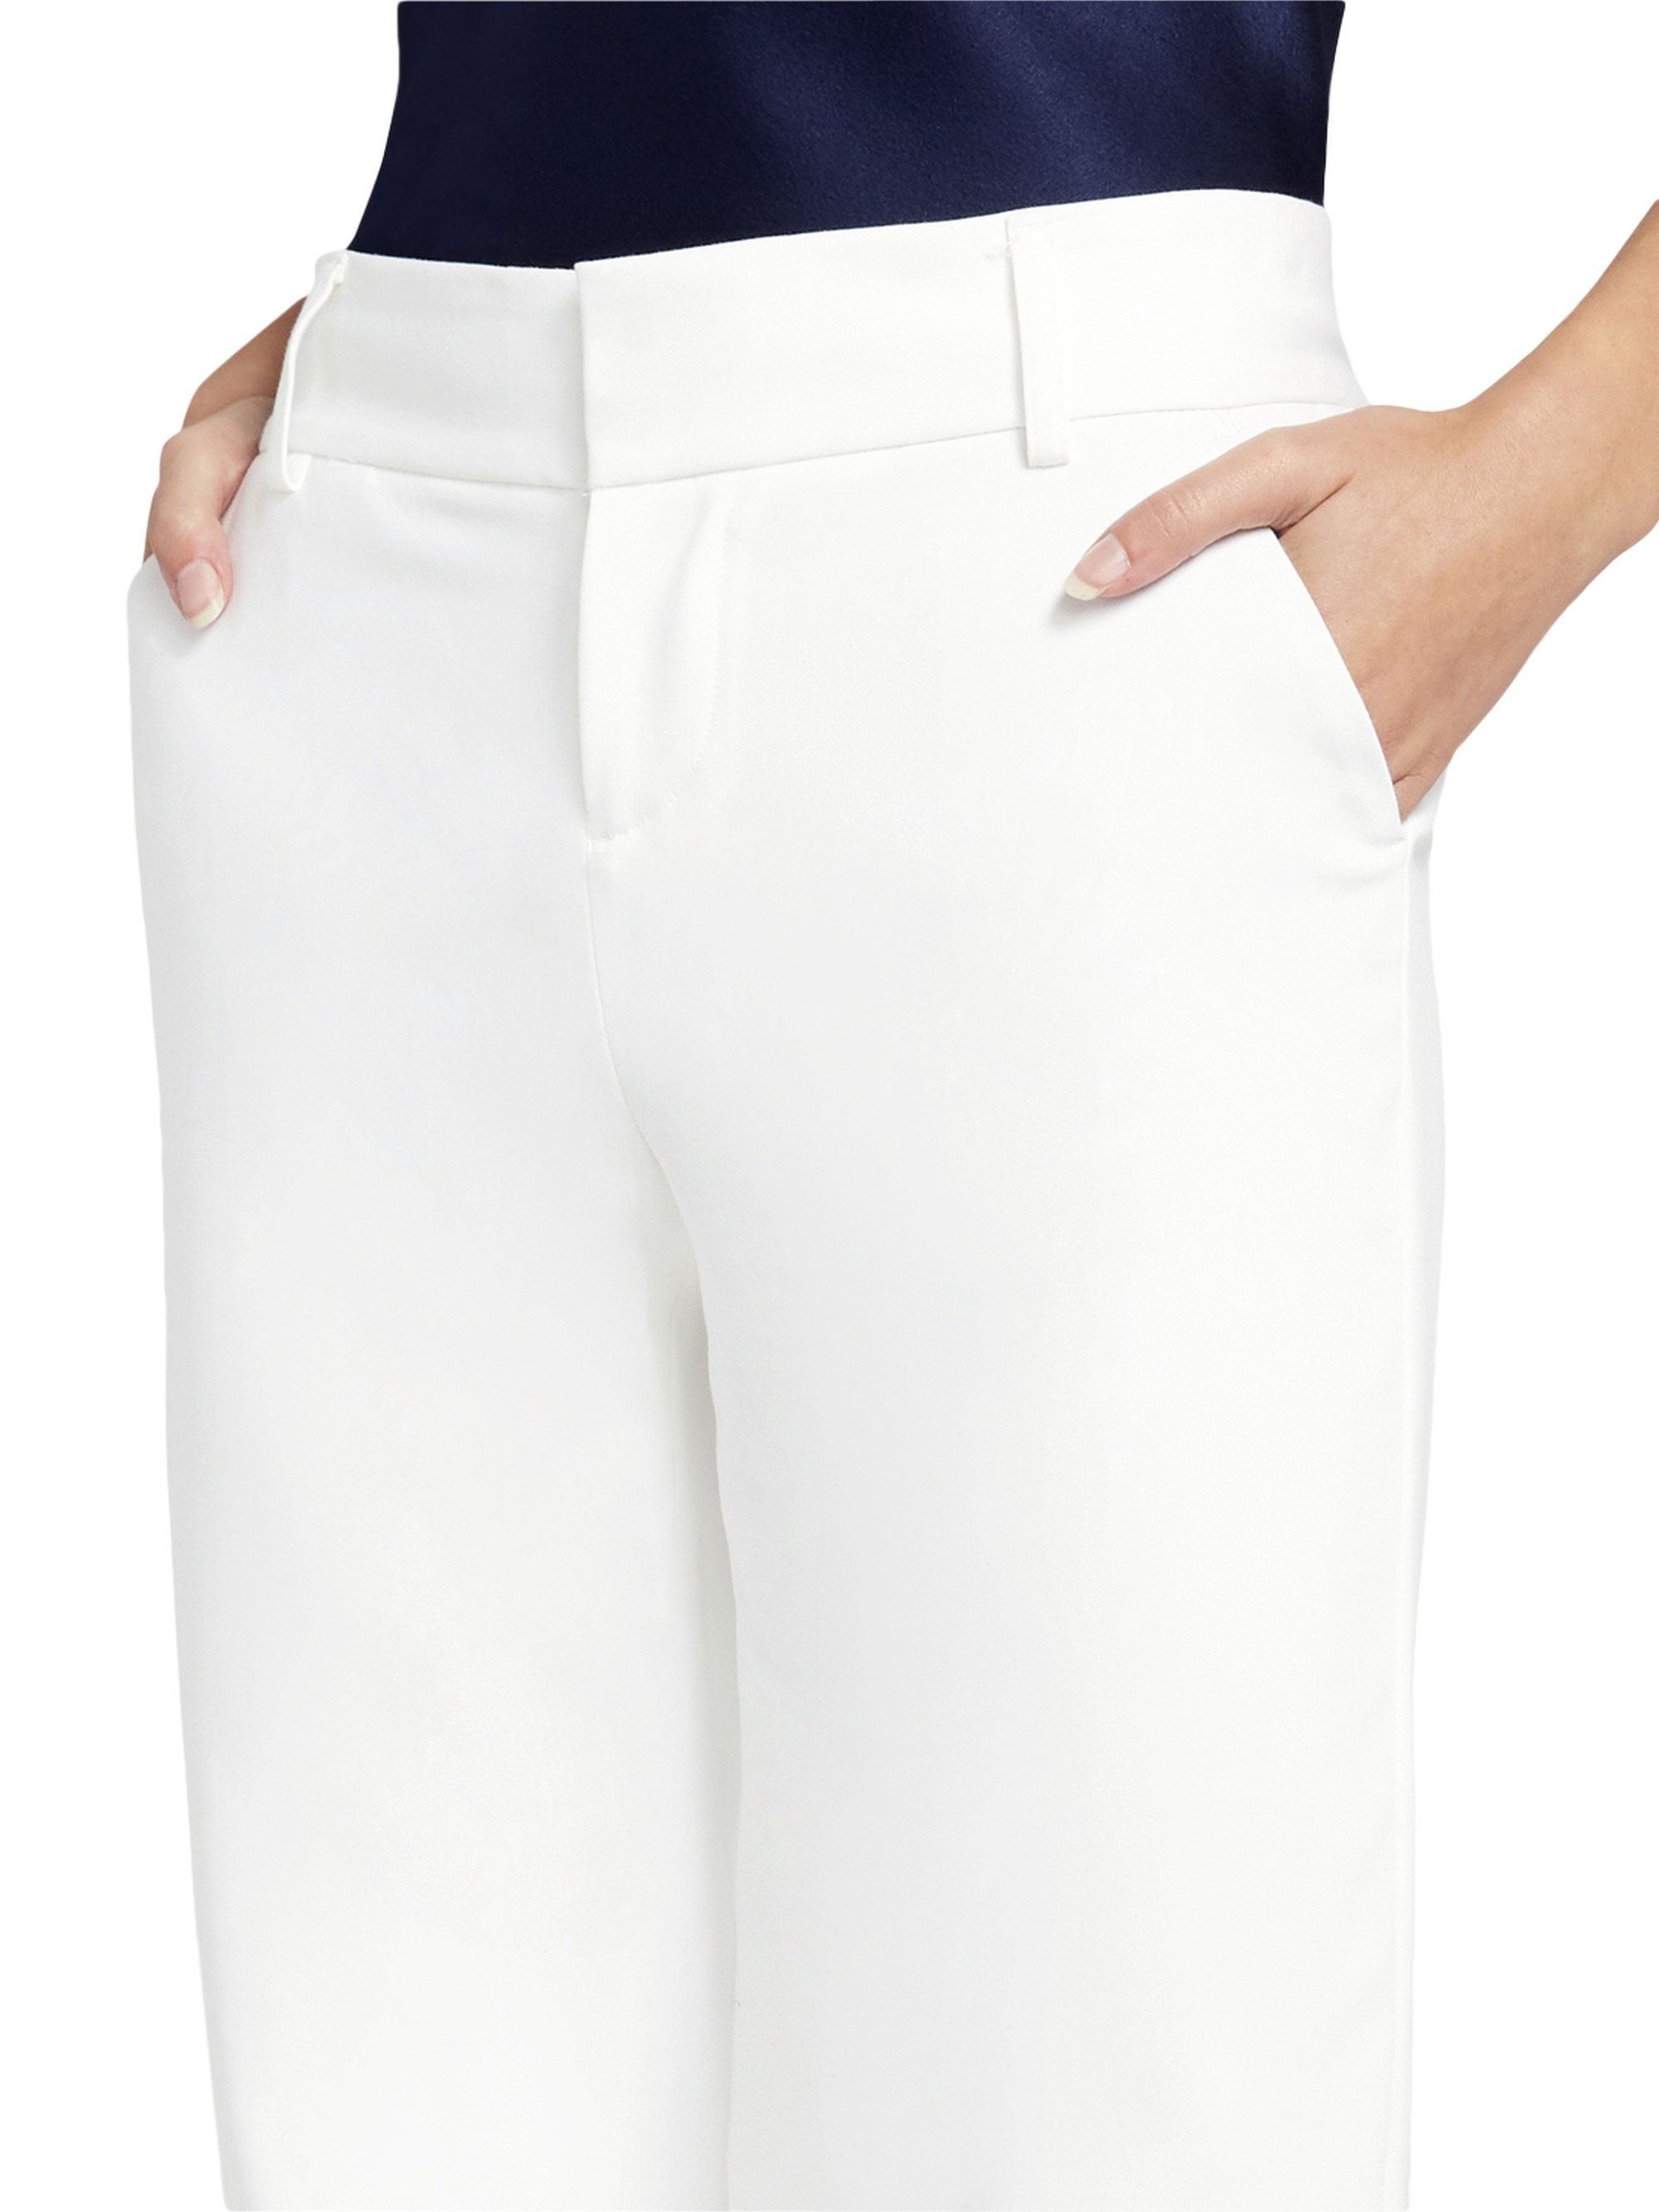 STACEY SLIM TROUSER - 5